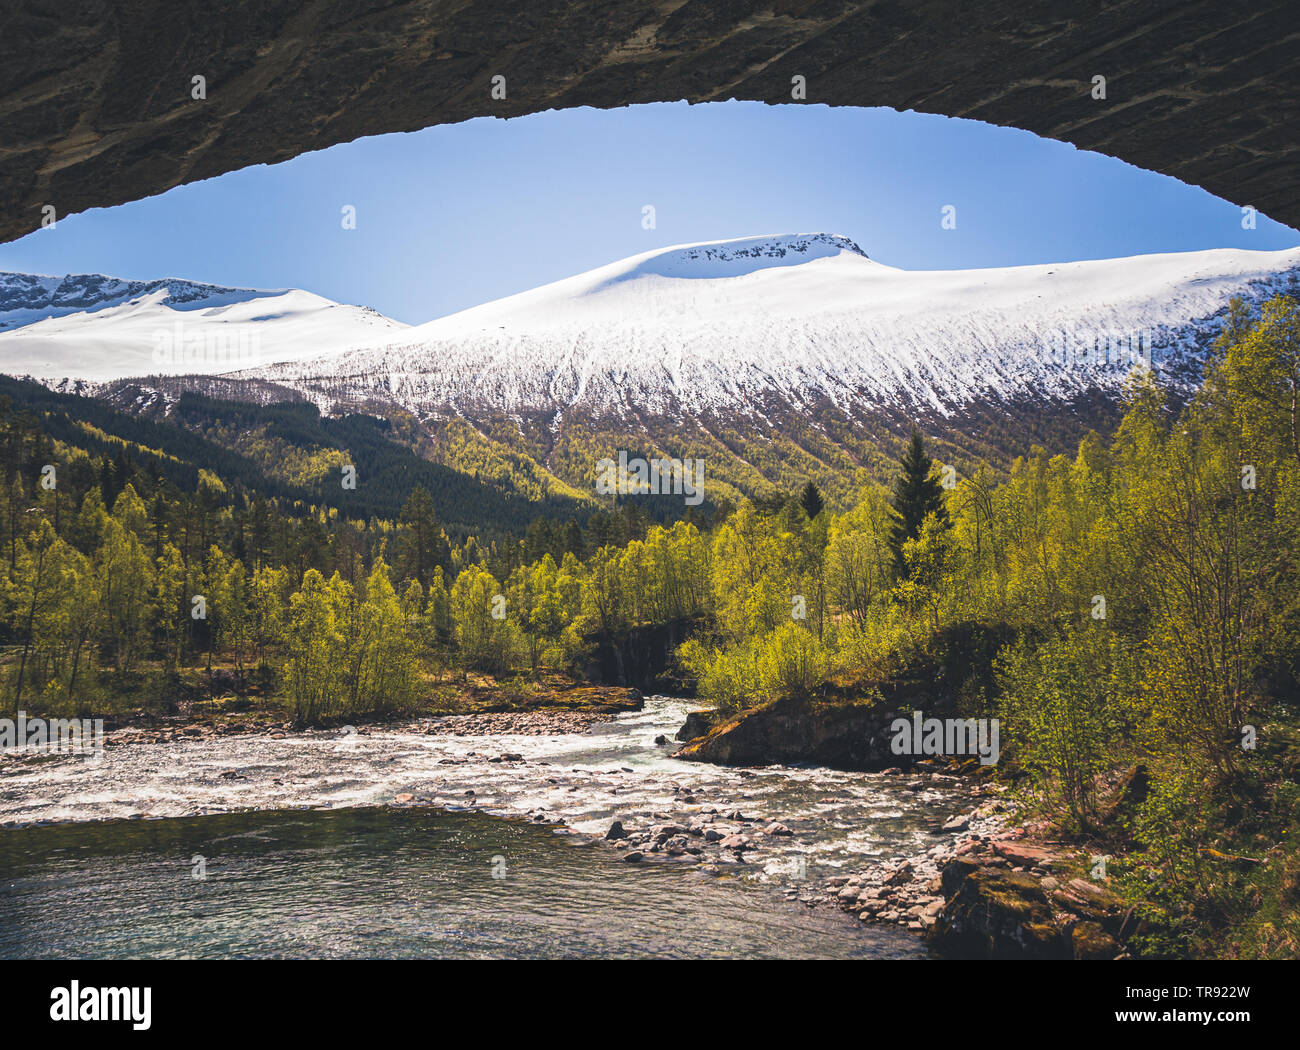 Mountain landscape of woodlands in Valldal area, middle Norway. Romsdal, Reinheimen mountains. Stock Photo